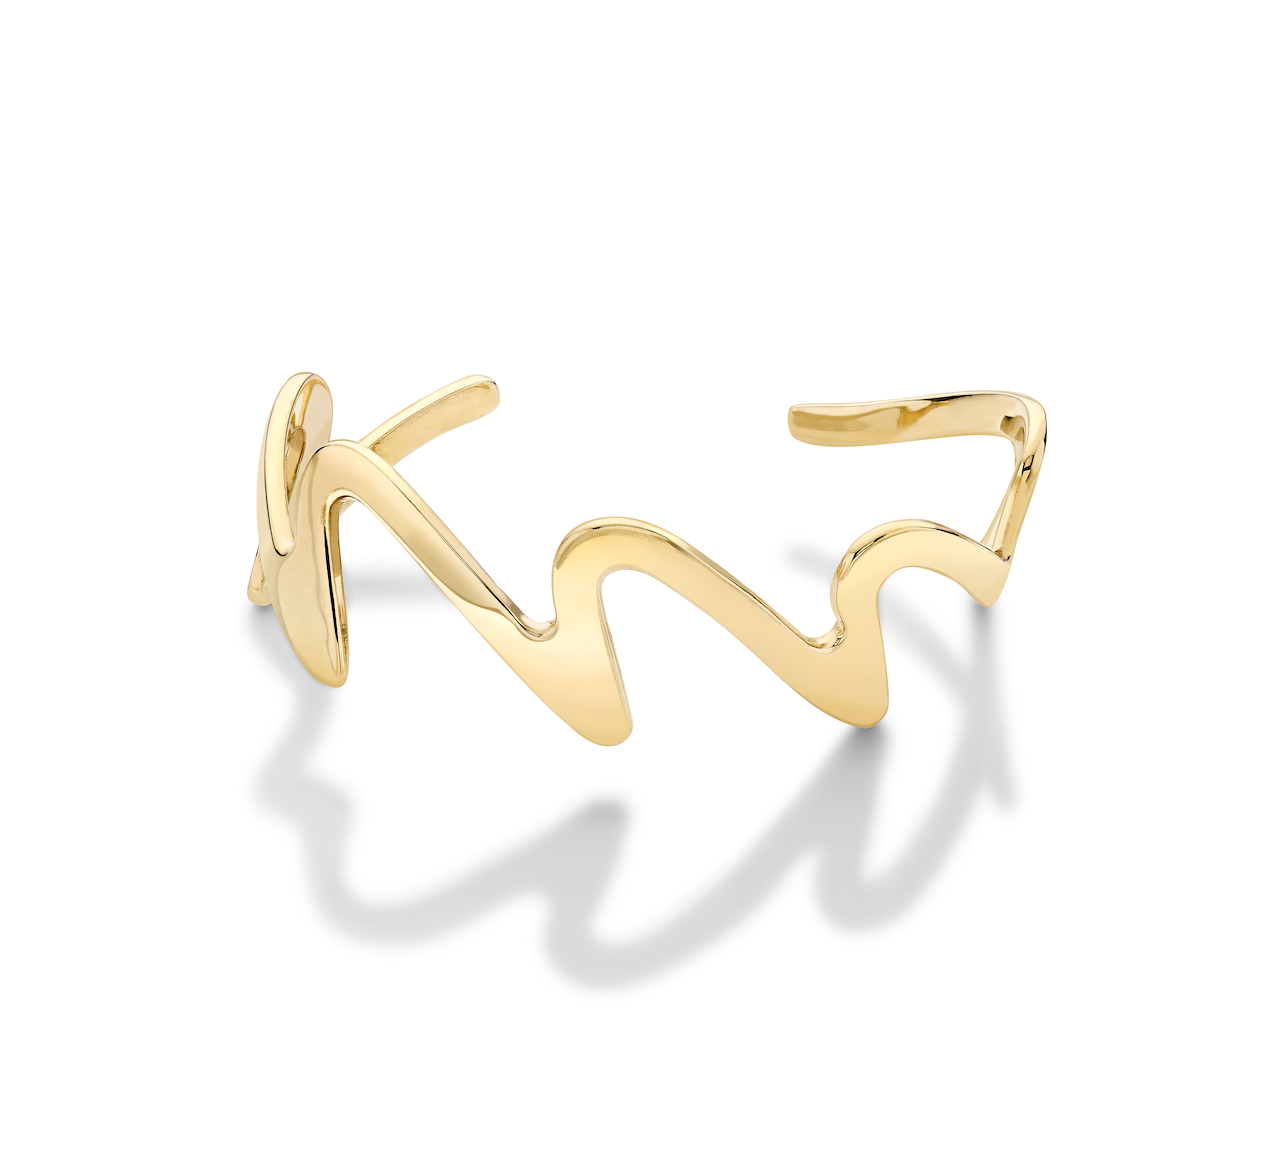 Luxury gold jewellery - 18ct Yellow Gold plated Sterling Silver Wedeln Bangle - Gstaad Collection, Augustine Jewellery, Luxury Jewellery London.